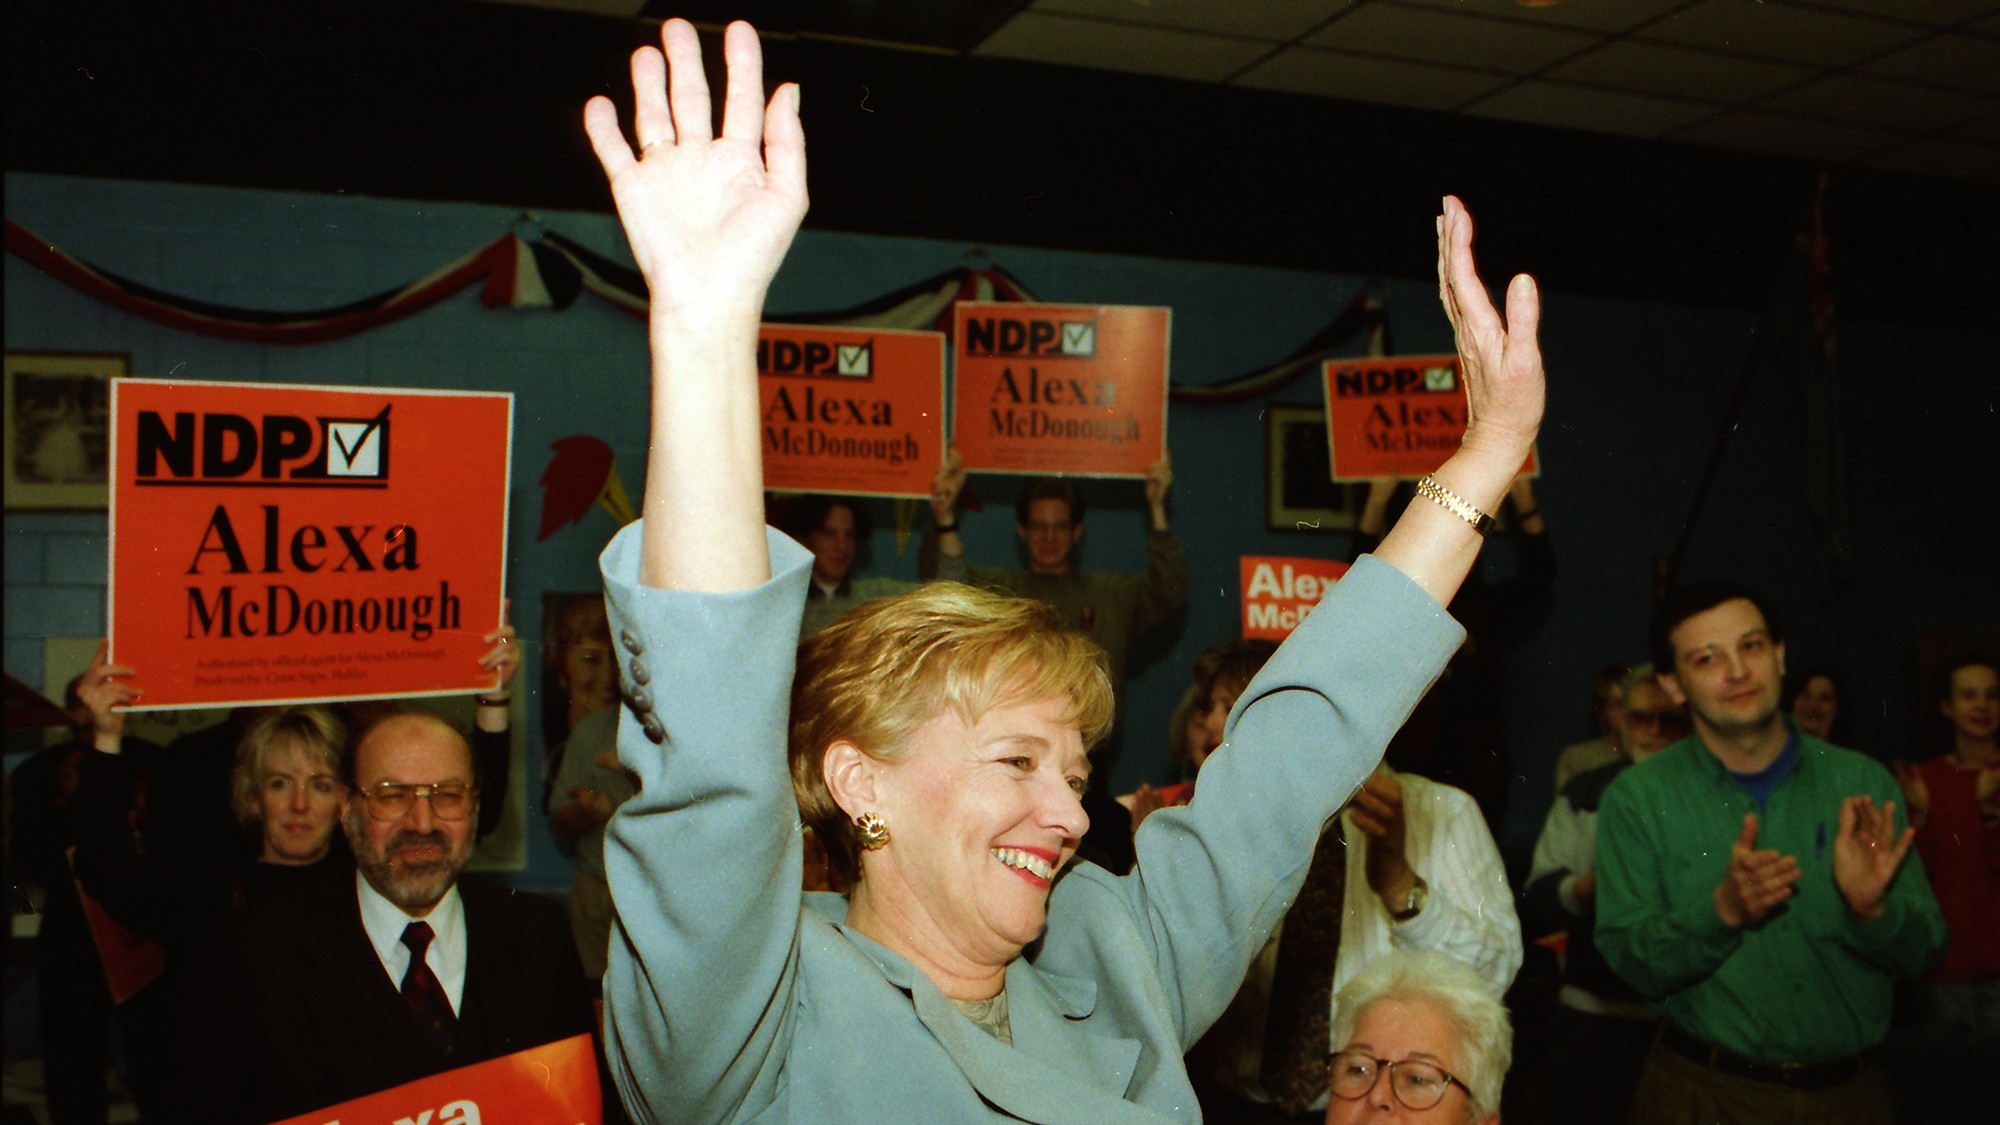 Alexa McDonough raises her arms in victory while surrounded by supporters with signs.